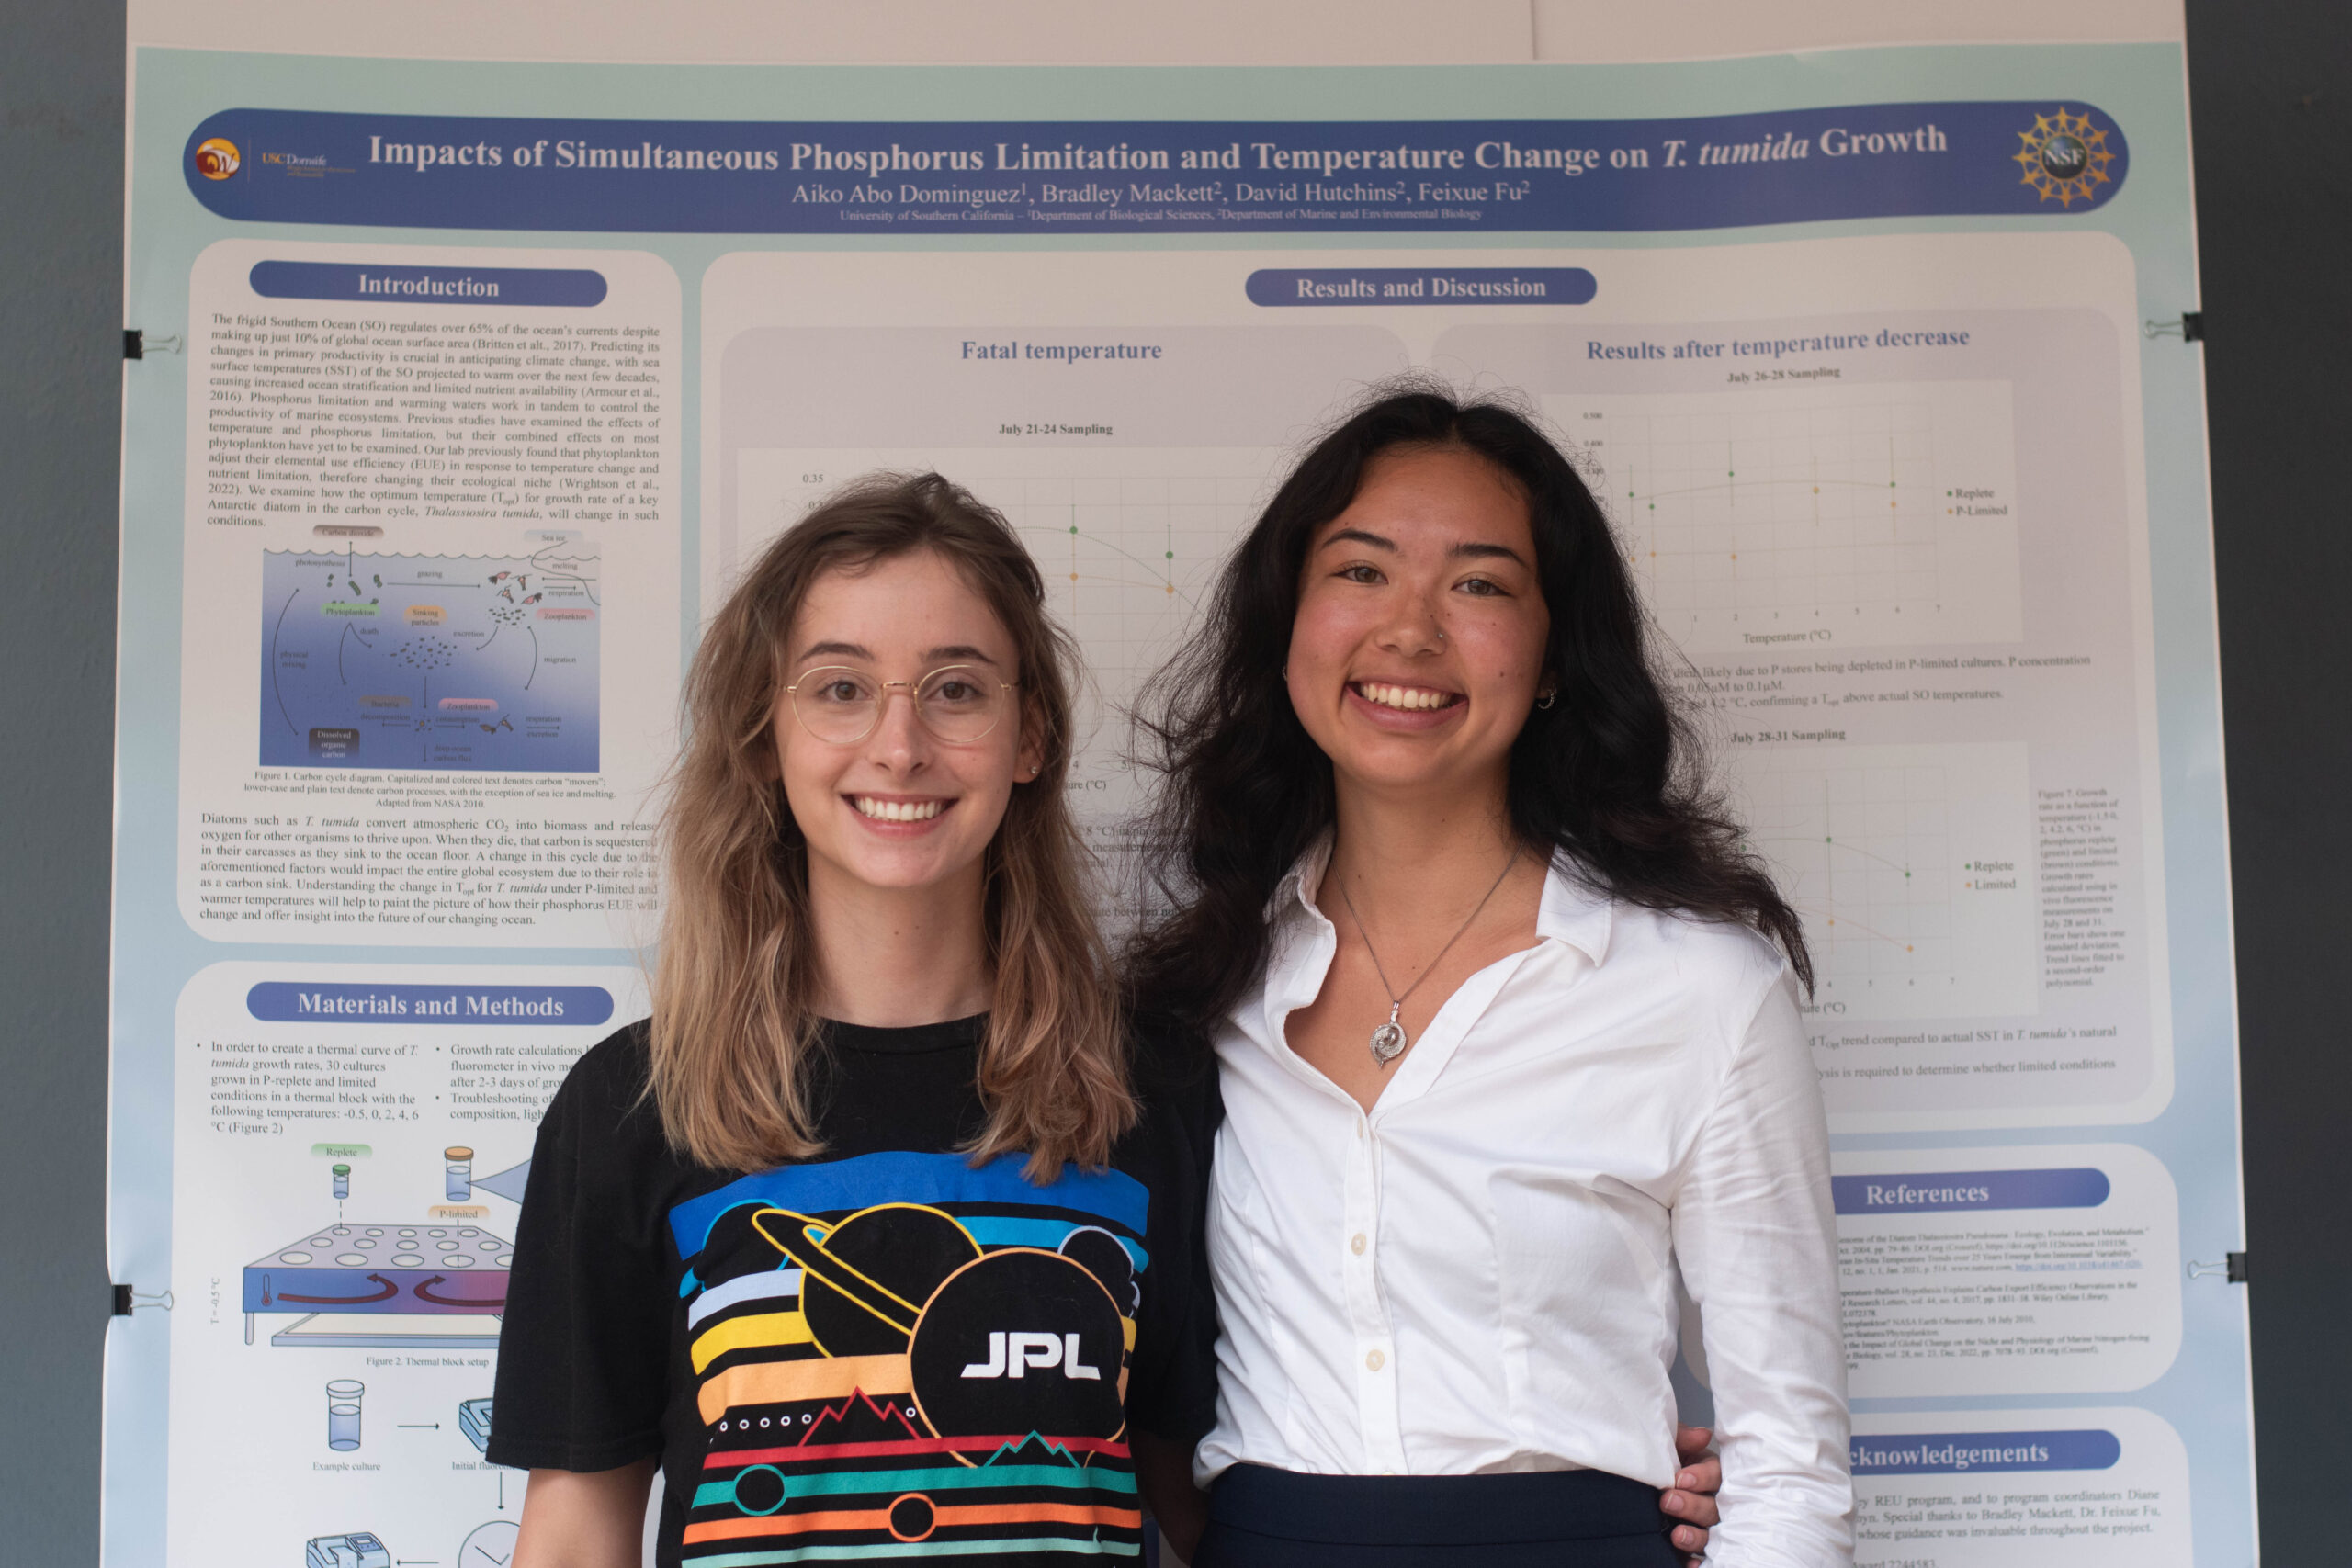 two individuals, with their arms around each other, smile while posing in front of a research poster titled "Impacts of Simultaneous Phosphorus Limitation and Temperature Change on T. tumida Growth"